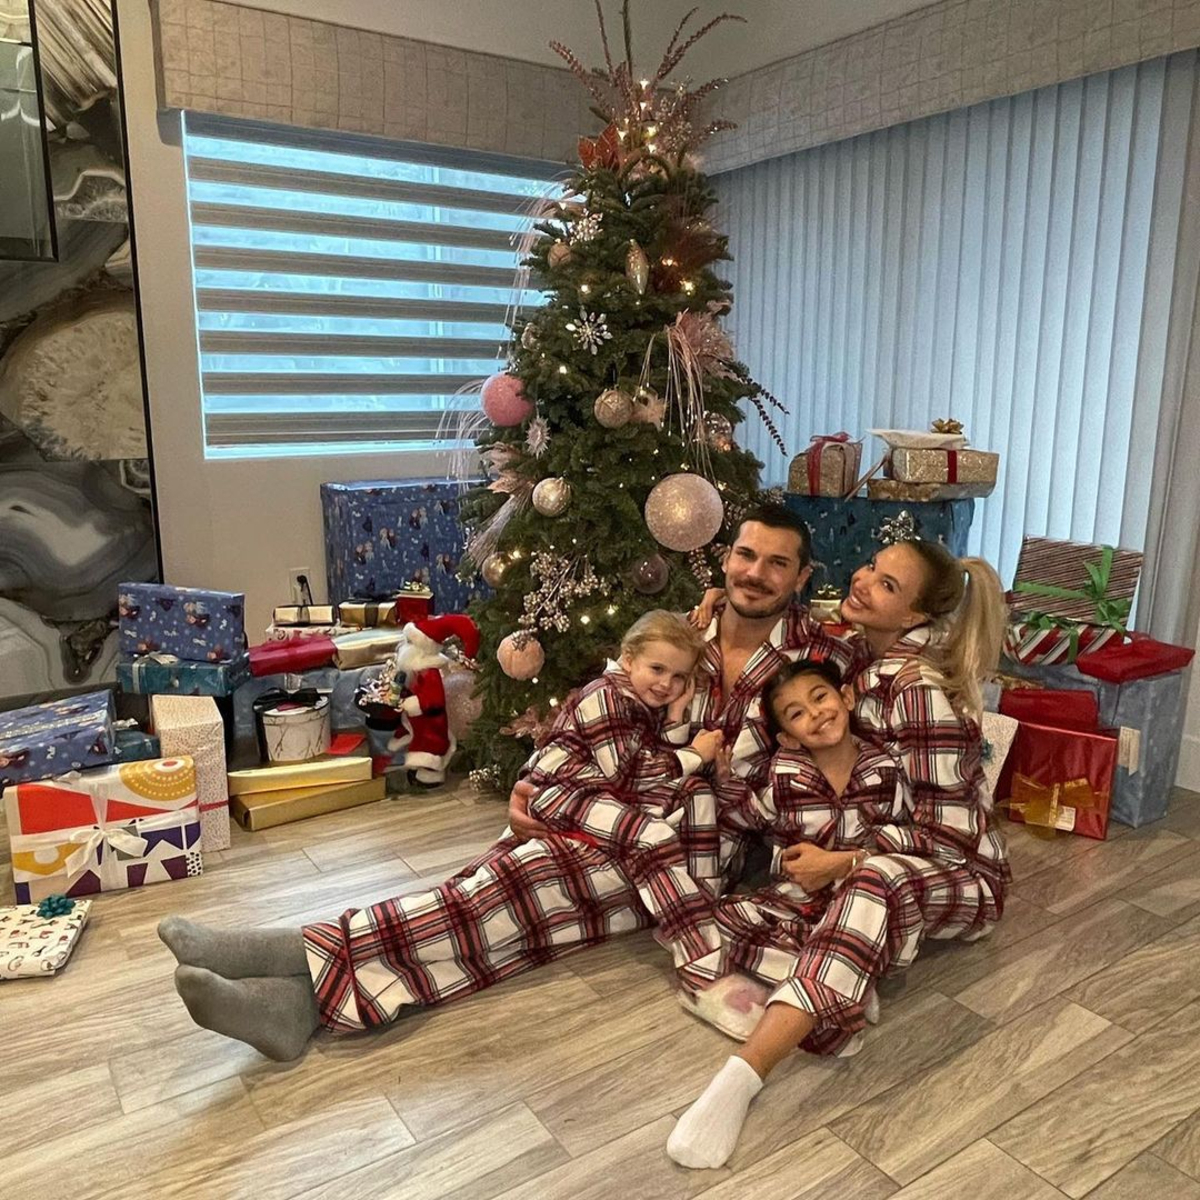 Photos from Celebrity Families Wearing Matching Holiday Pajamas